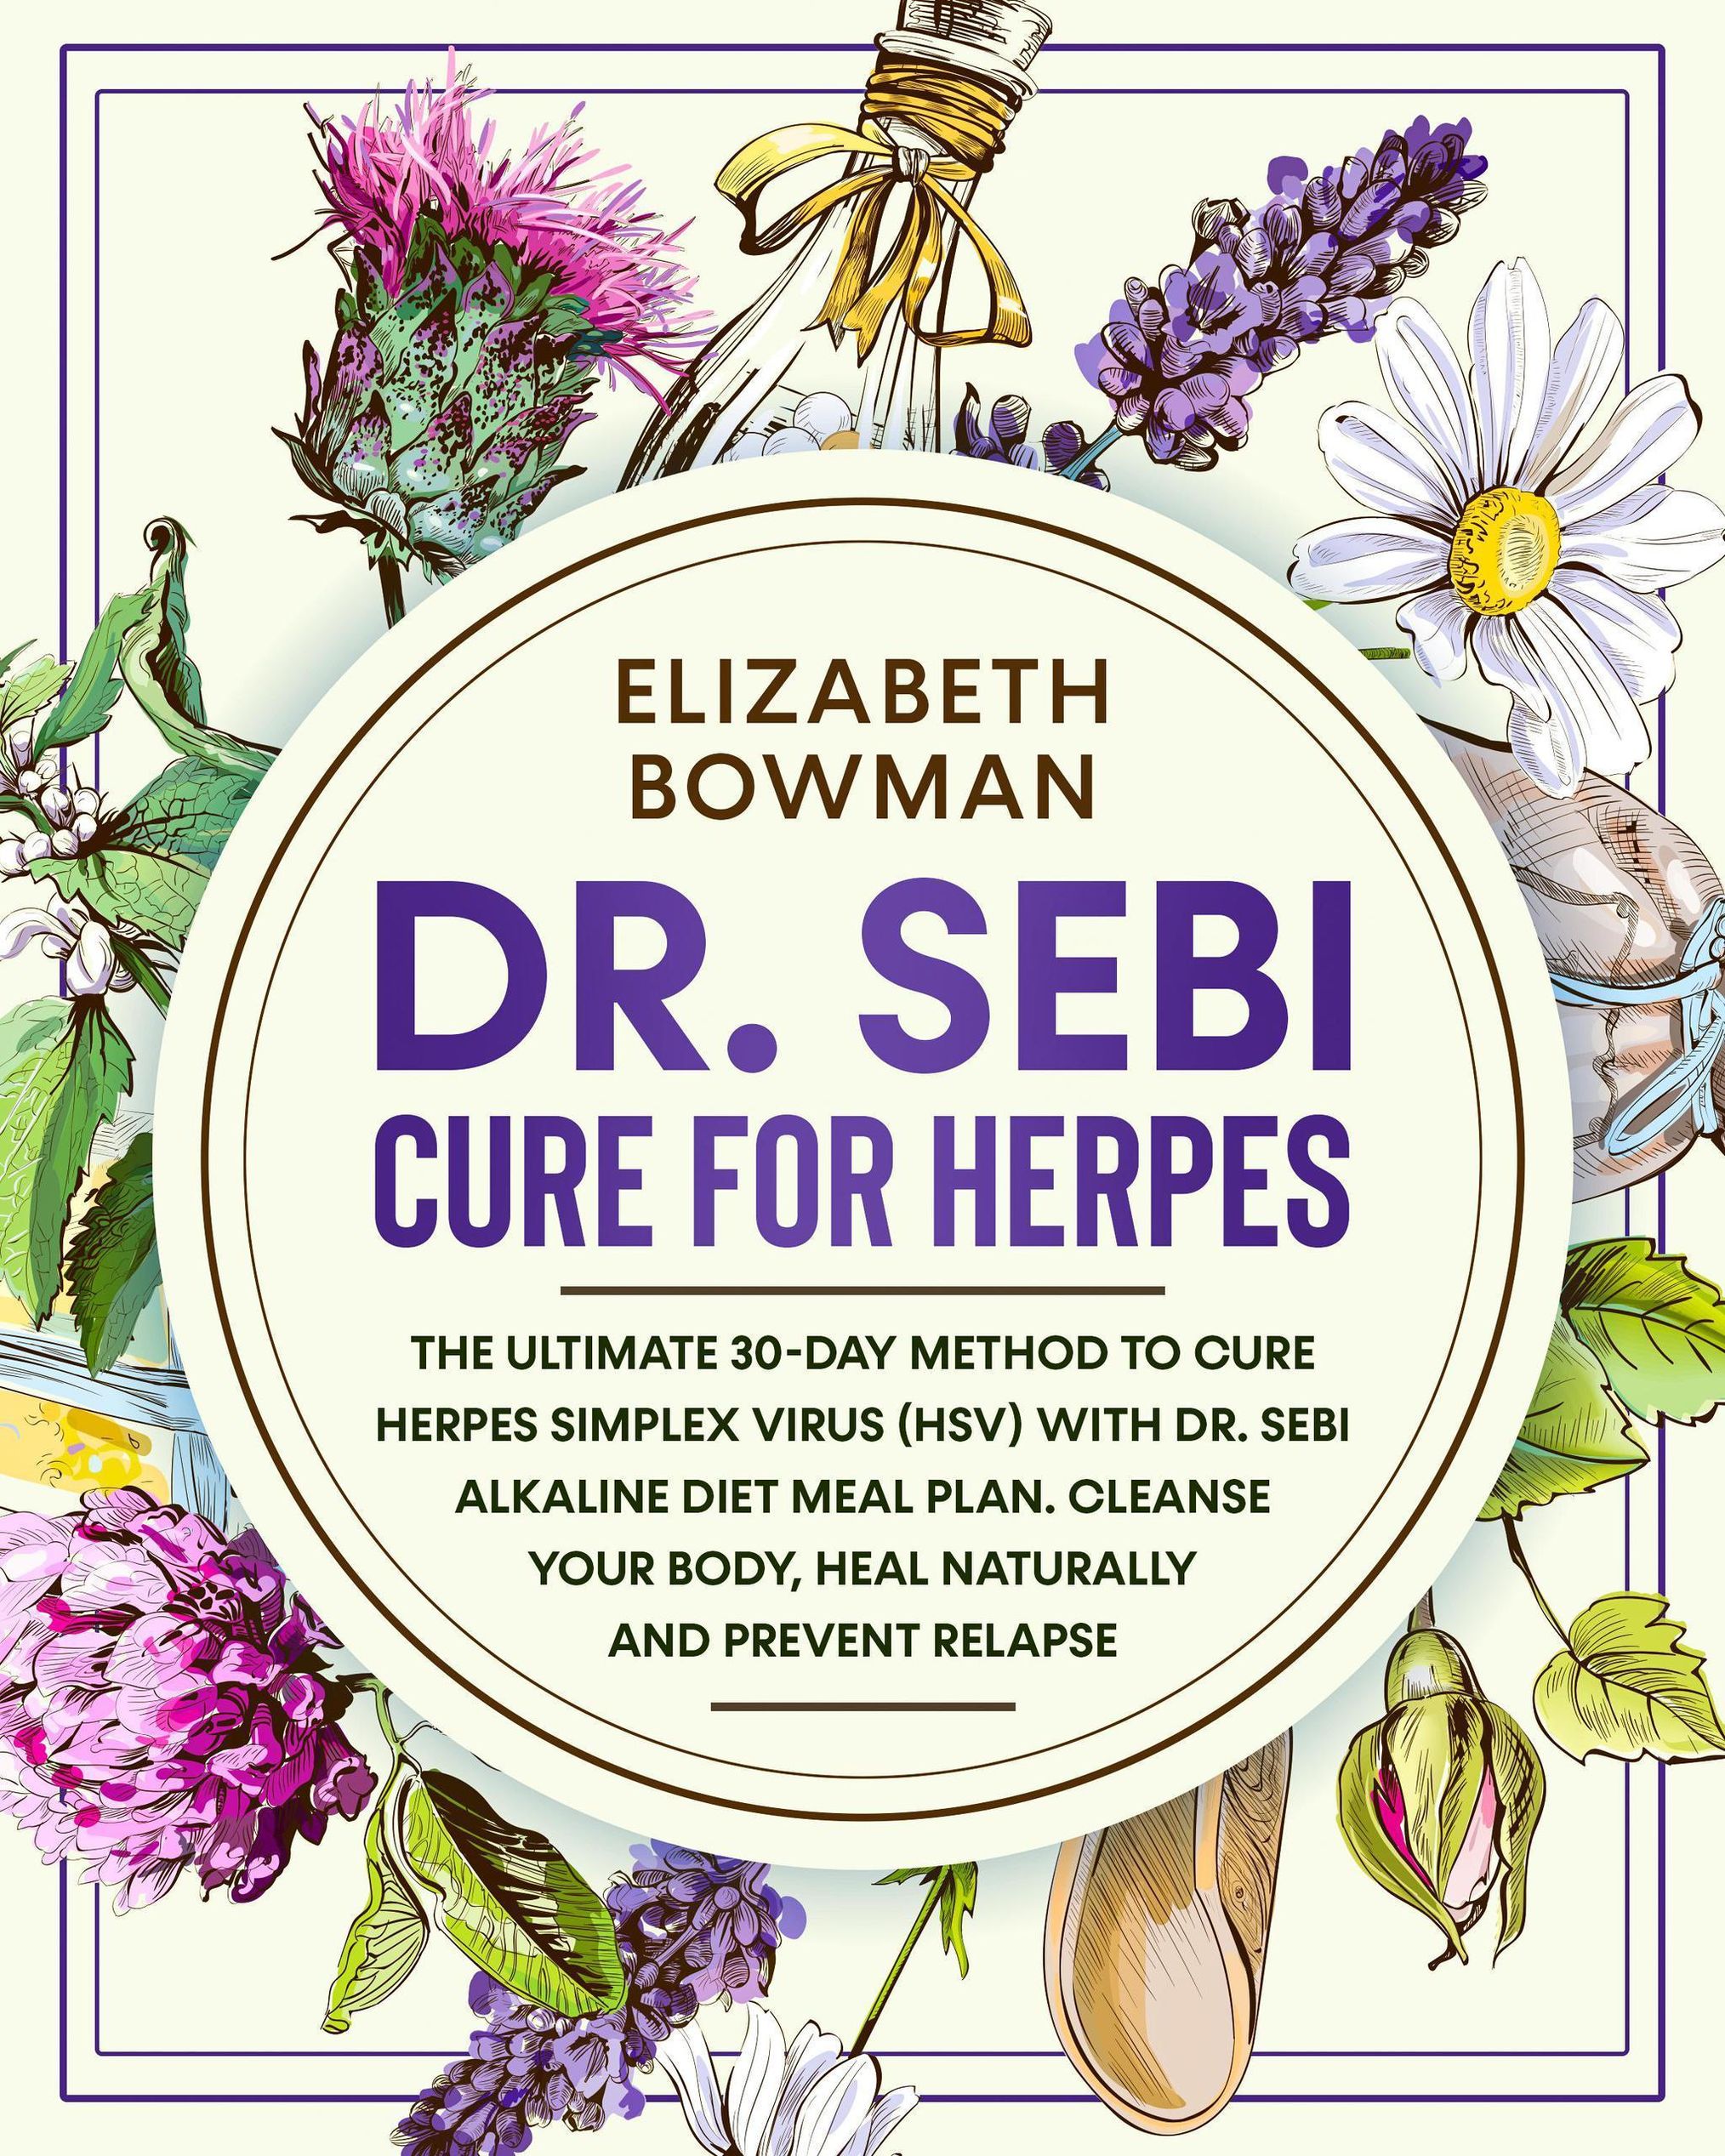 Dr. Sebi Cure for Herpes: The Ultimate 30-Day Method to Cure Herpes Simplex  Virus HSV With Dr. Sebi Alkaline Diet Meal Plan. Cleanse Your Body, Heal  Naturally and Prevent Relapse. Dr. Sebi